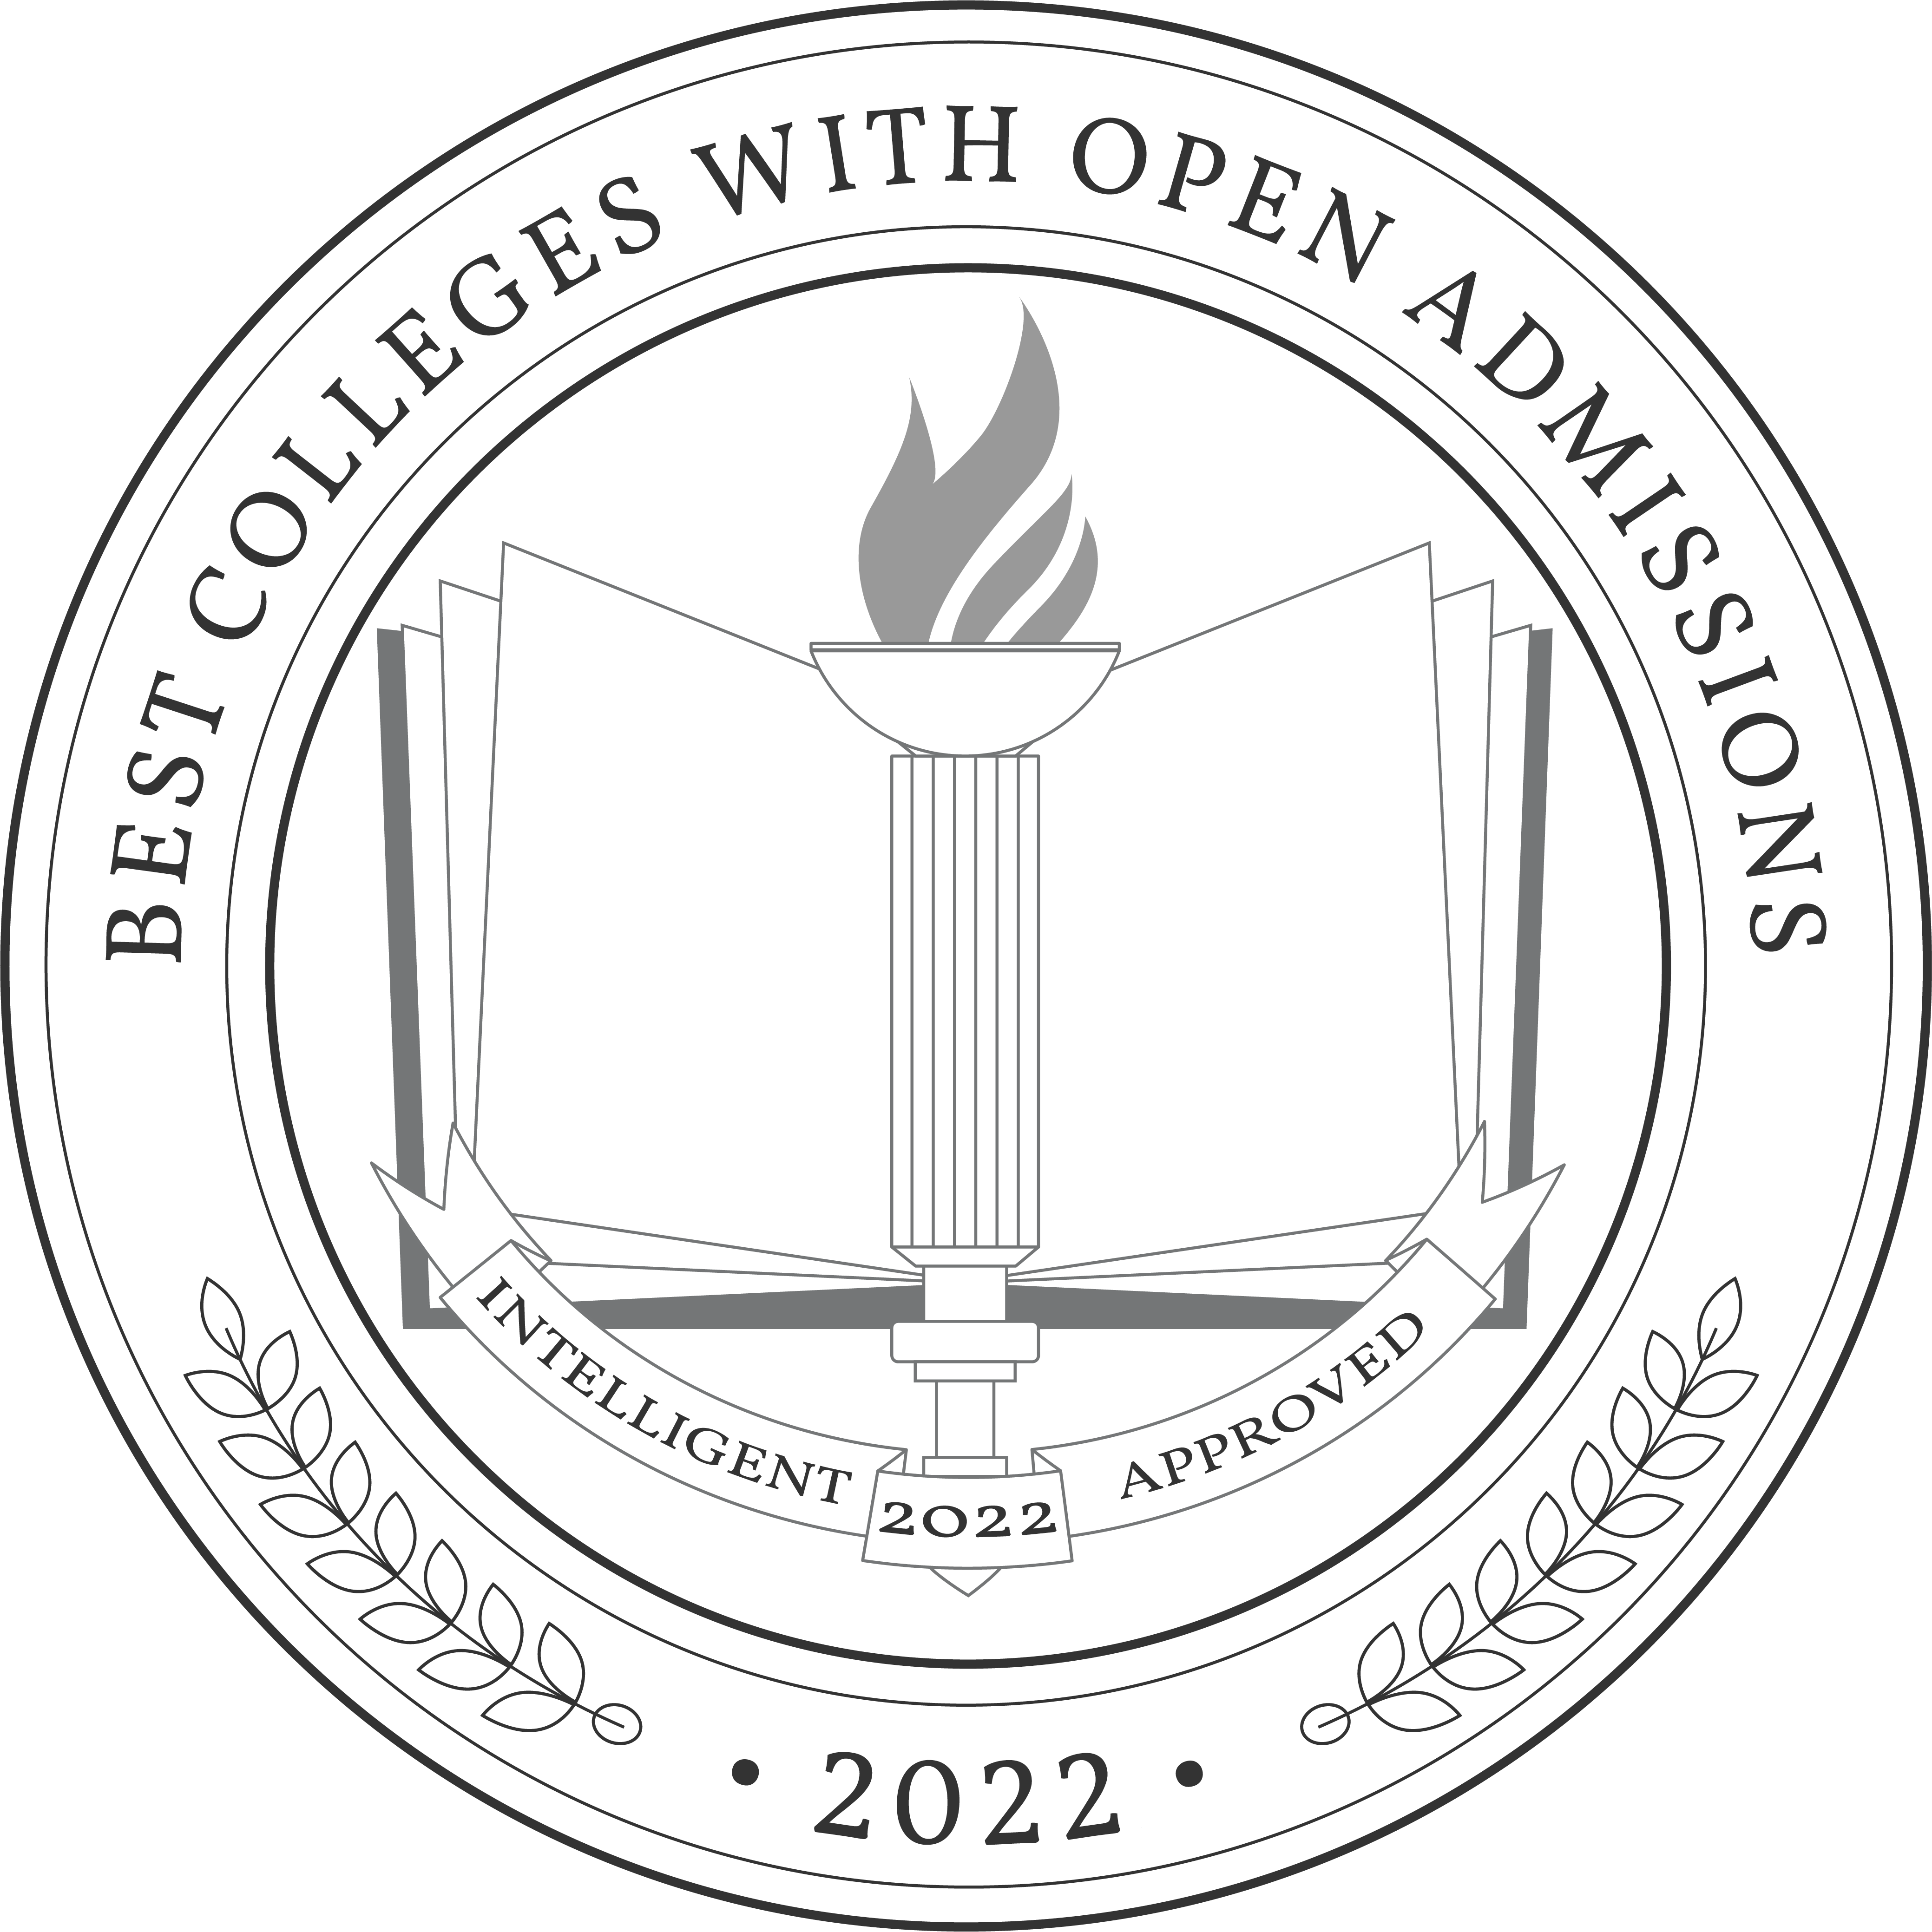 Best Colleges with Open Admissions Badge